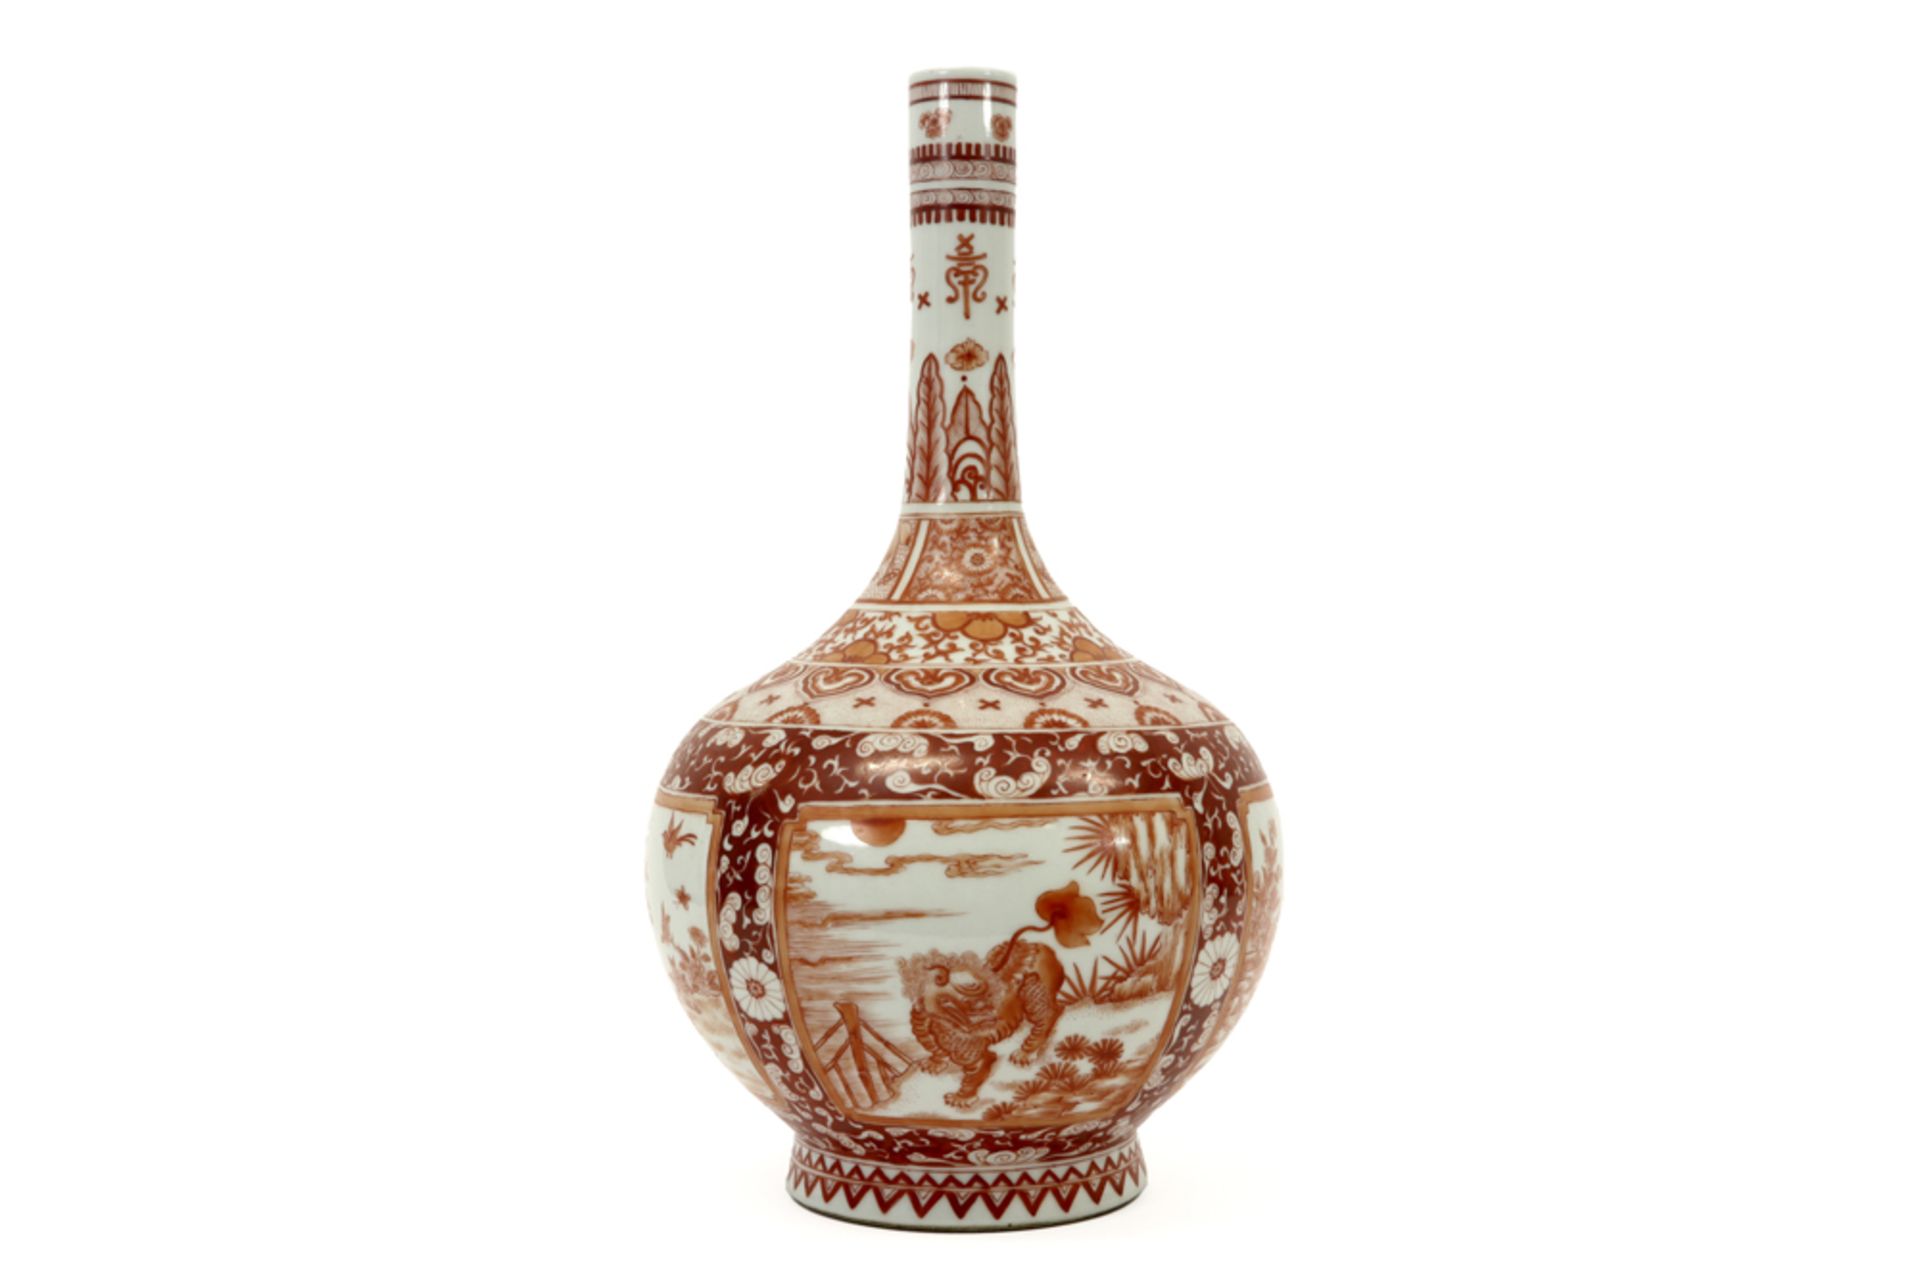 Chinese vase with bottle neck in marked porcelain with a rich decor in sanguine colors including